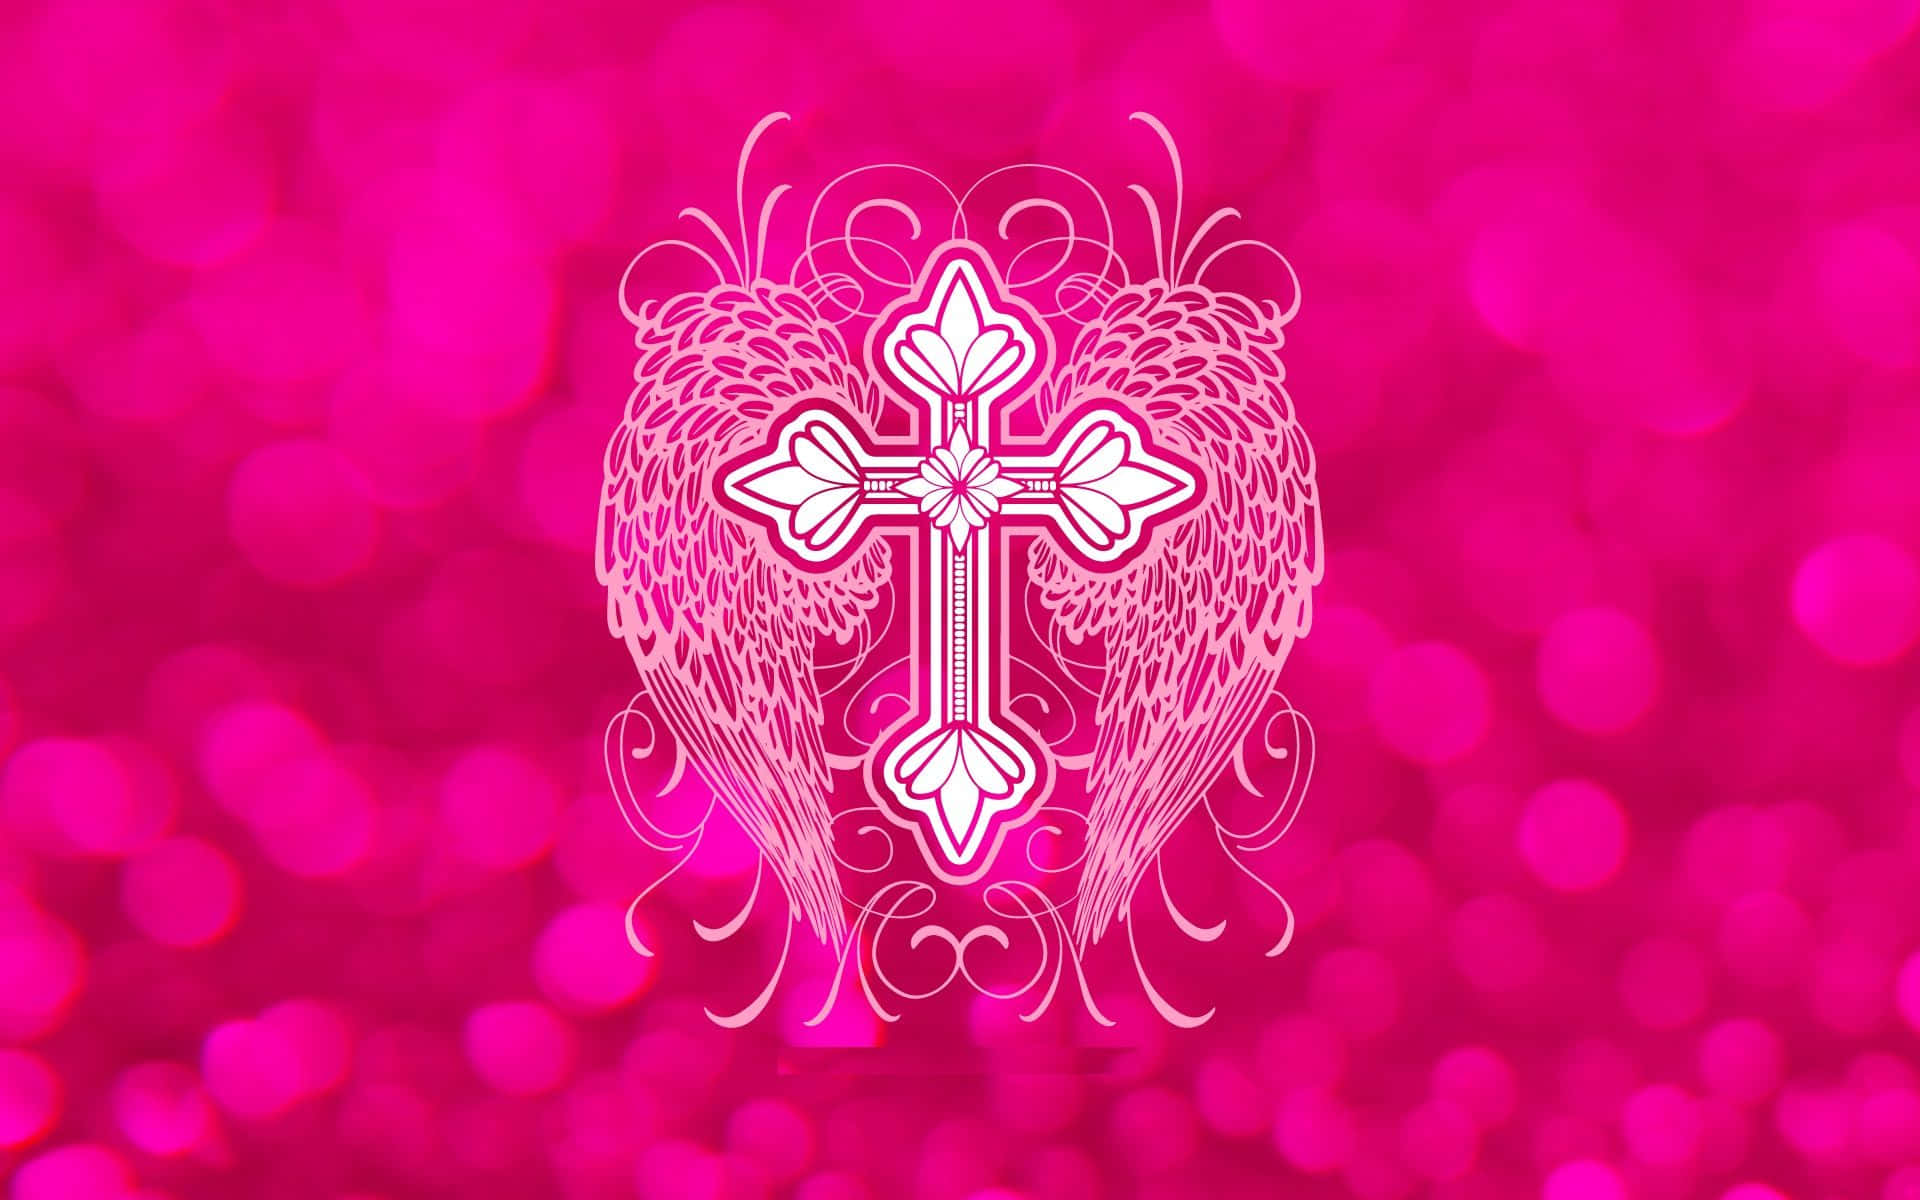 pink cross images